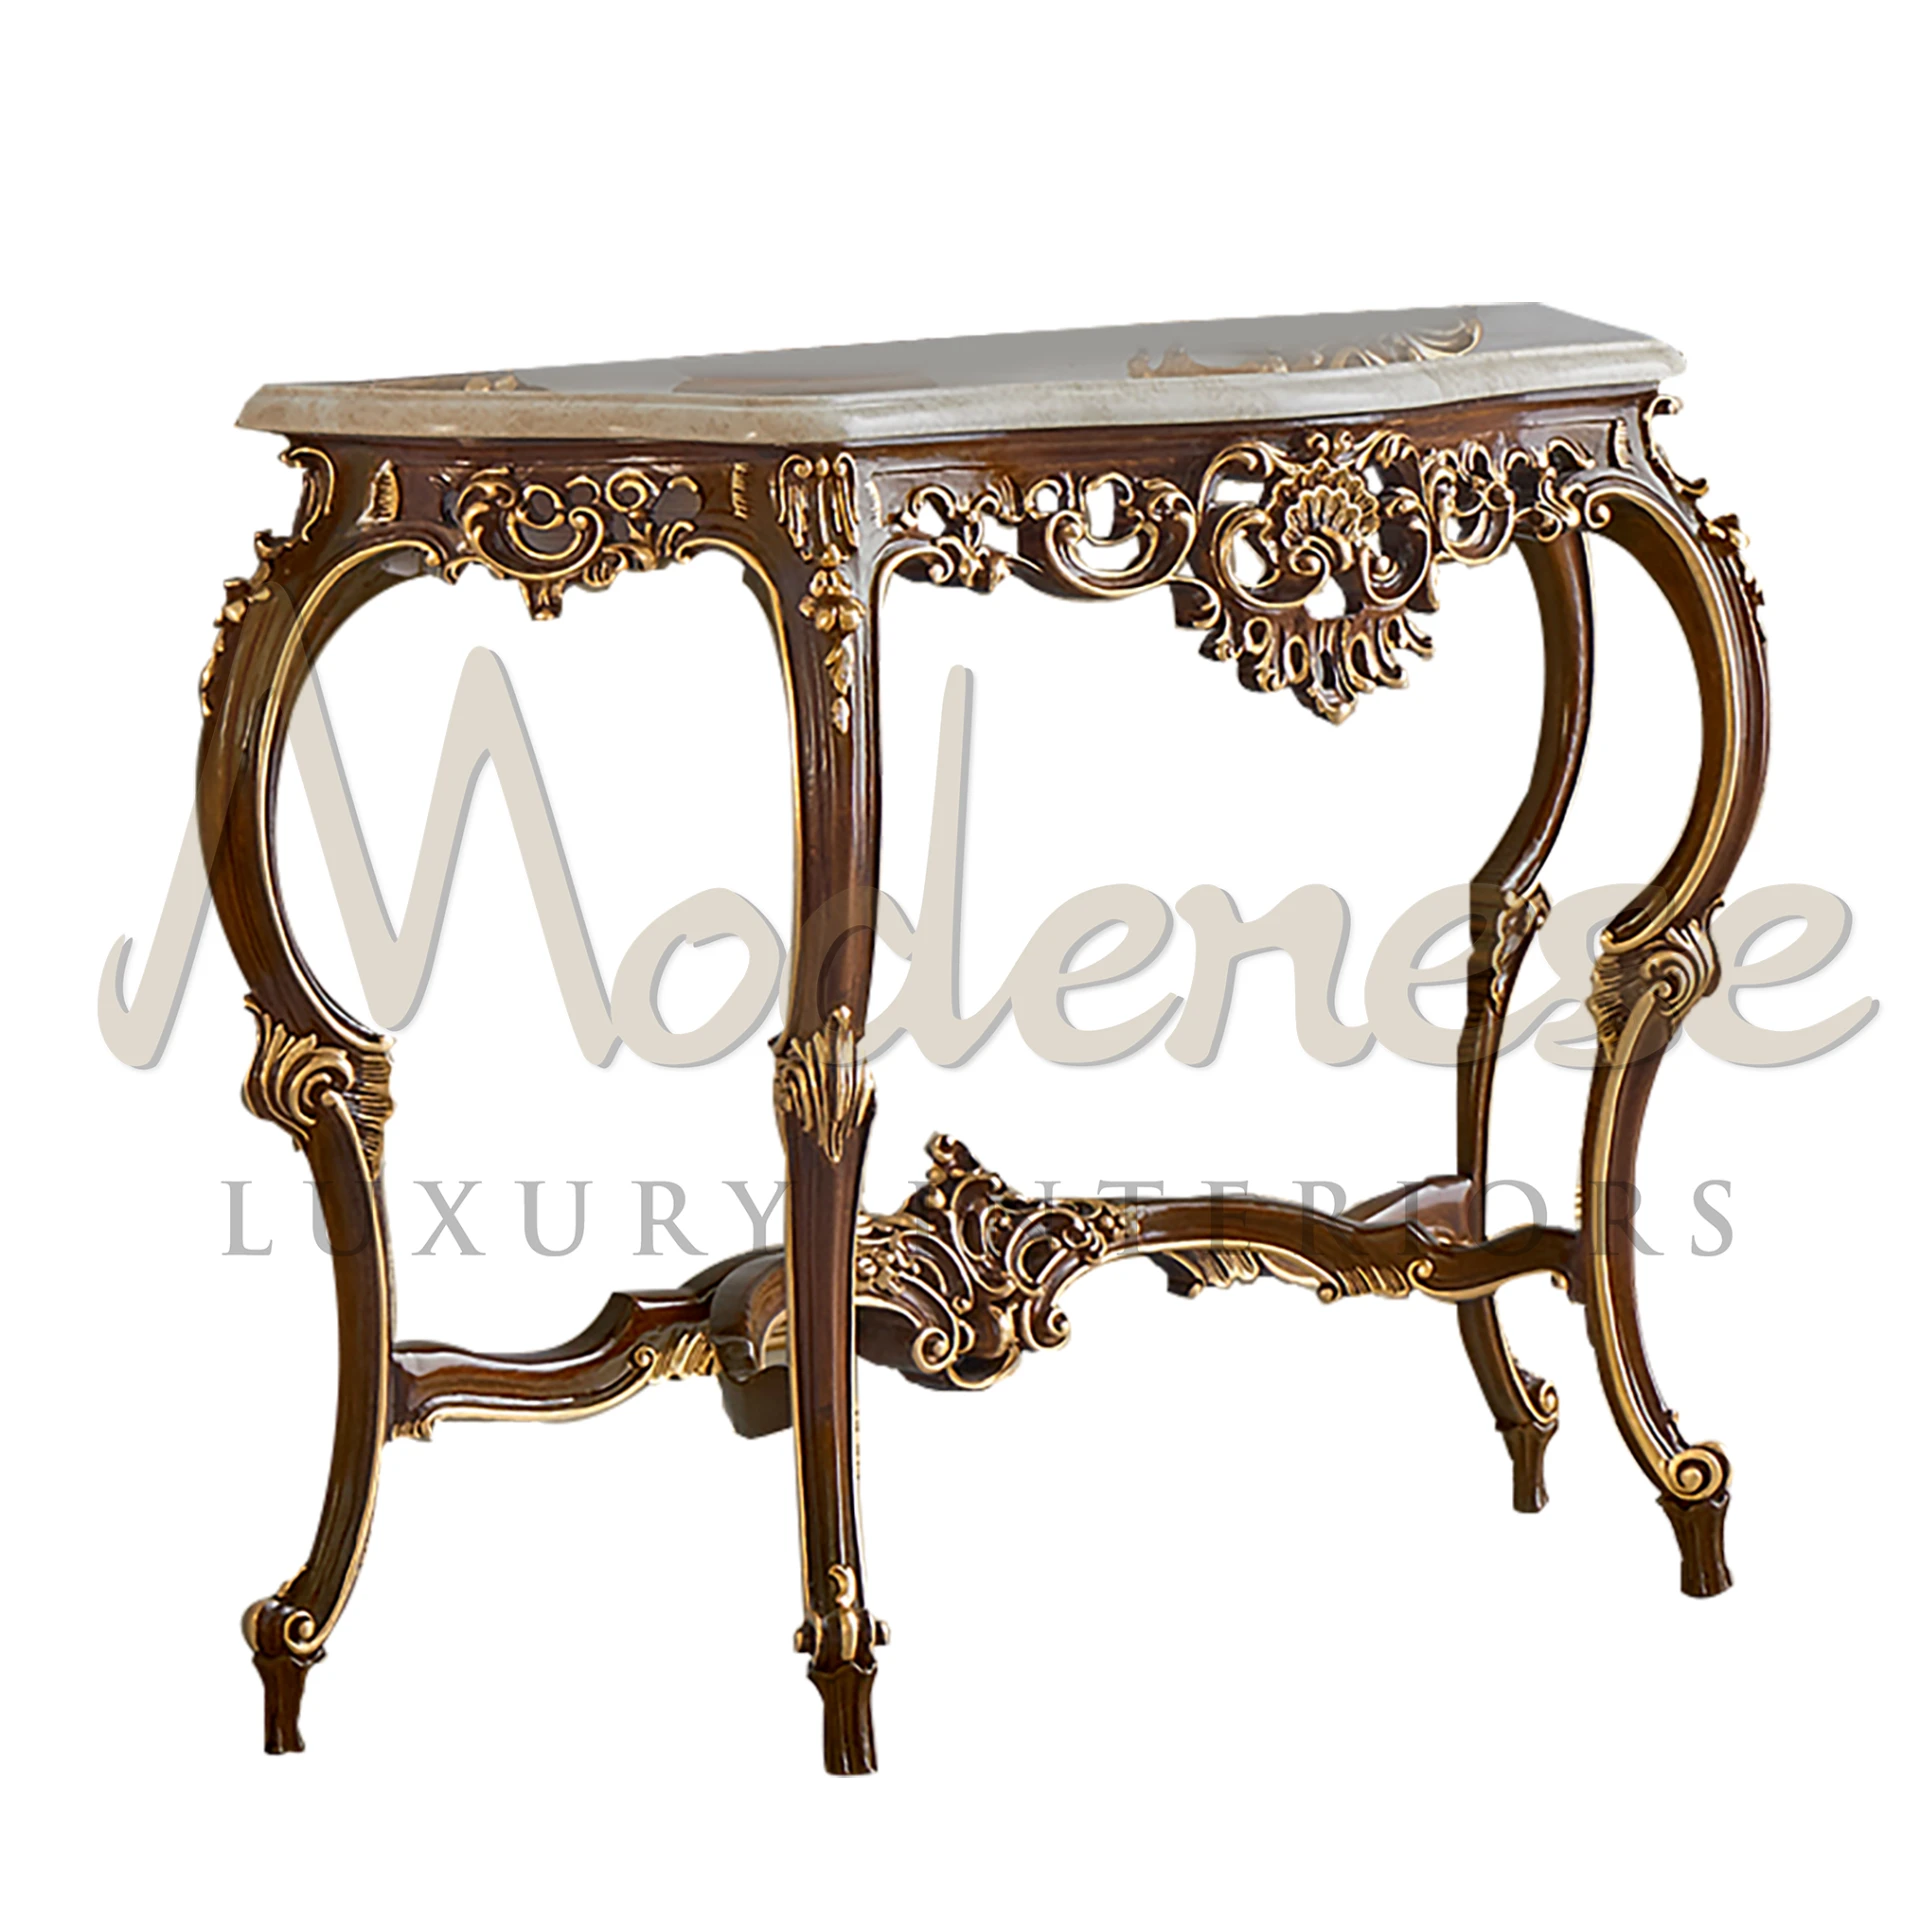 Timeless Solid Wood Console with Marble Top, a statement of elegance for luxury interiors.